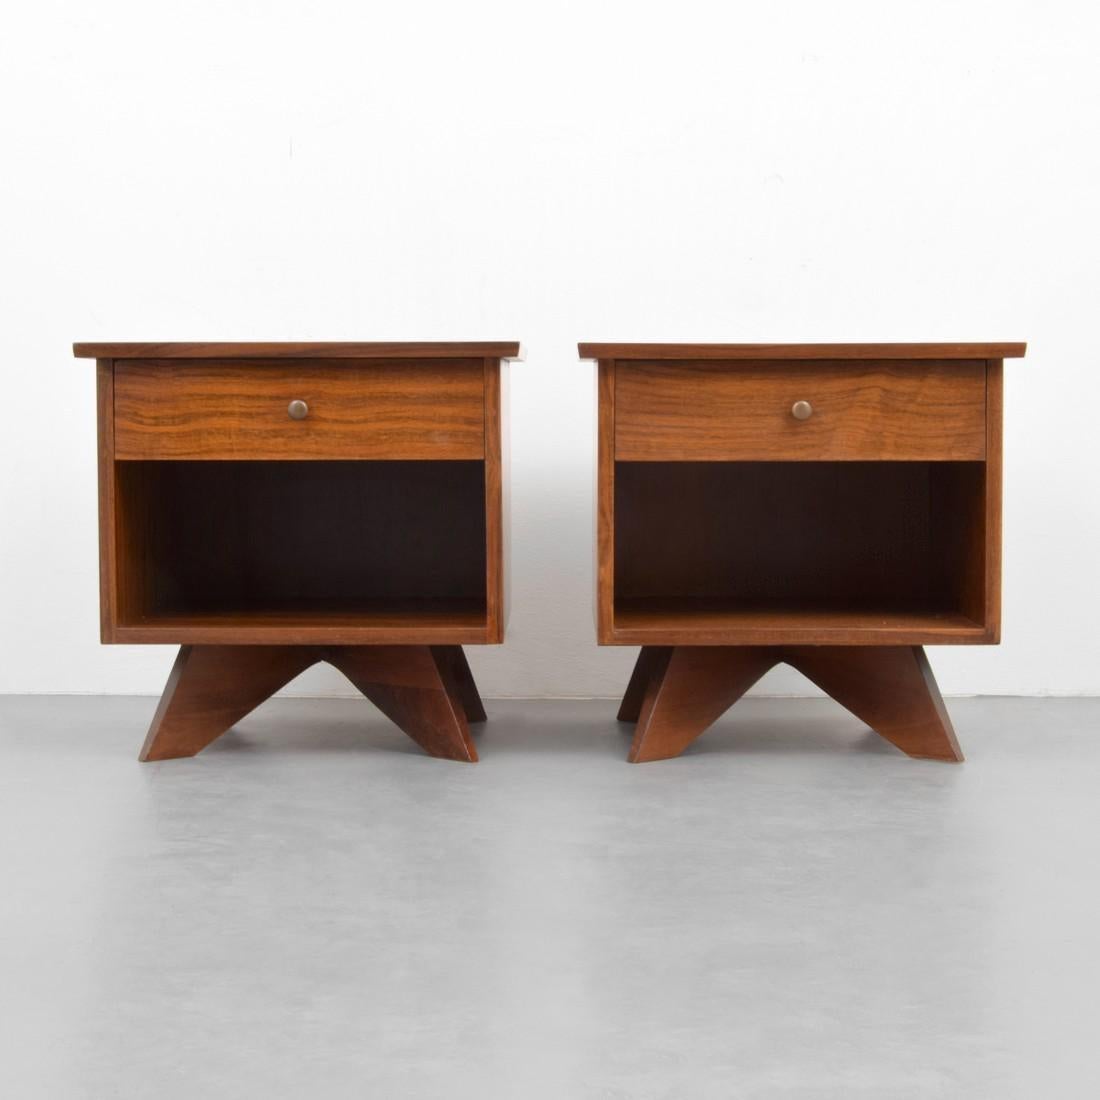 Pair of nightstands model no. 215 designed in 1958 by George Nakashima for his origins line, produced by the Widdicomb Furniture company, Grand Rapids, Michigan. The nightstands each feature one drawer and are in east Indian laurel veneers and solid